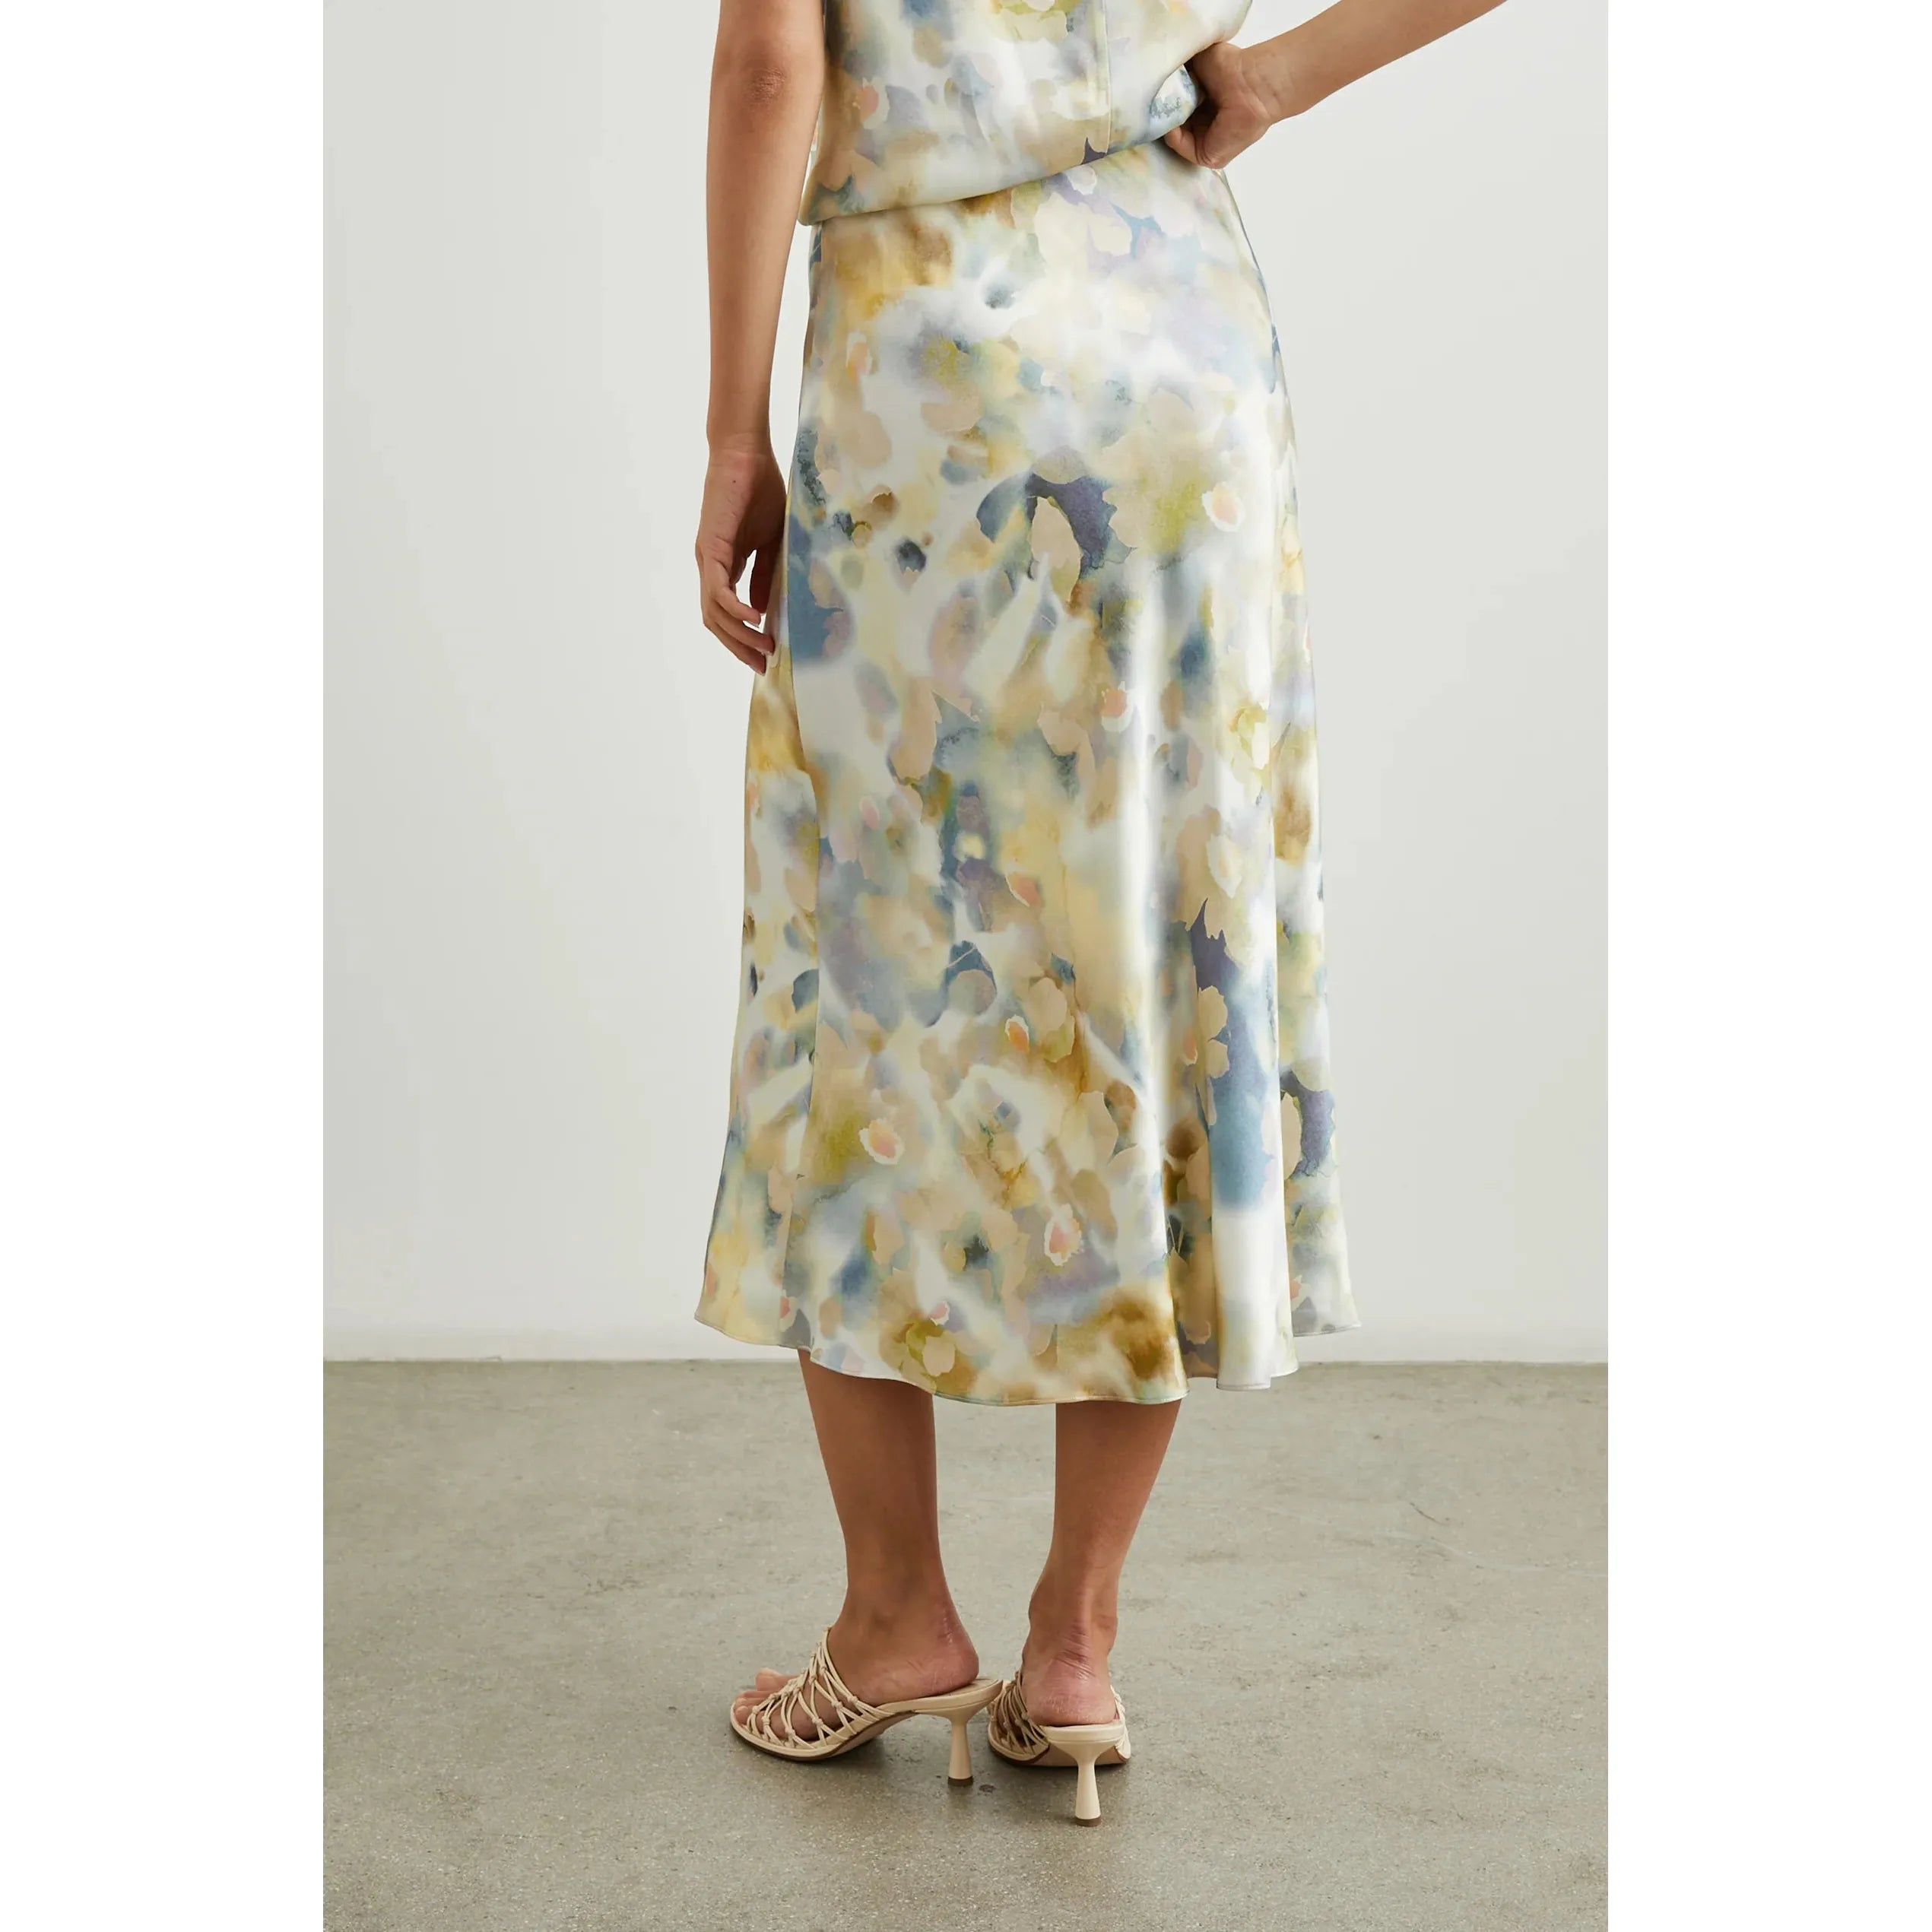 Rails - Anya Skirt in Diffused Blossom